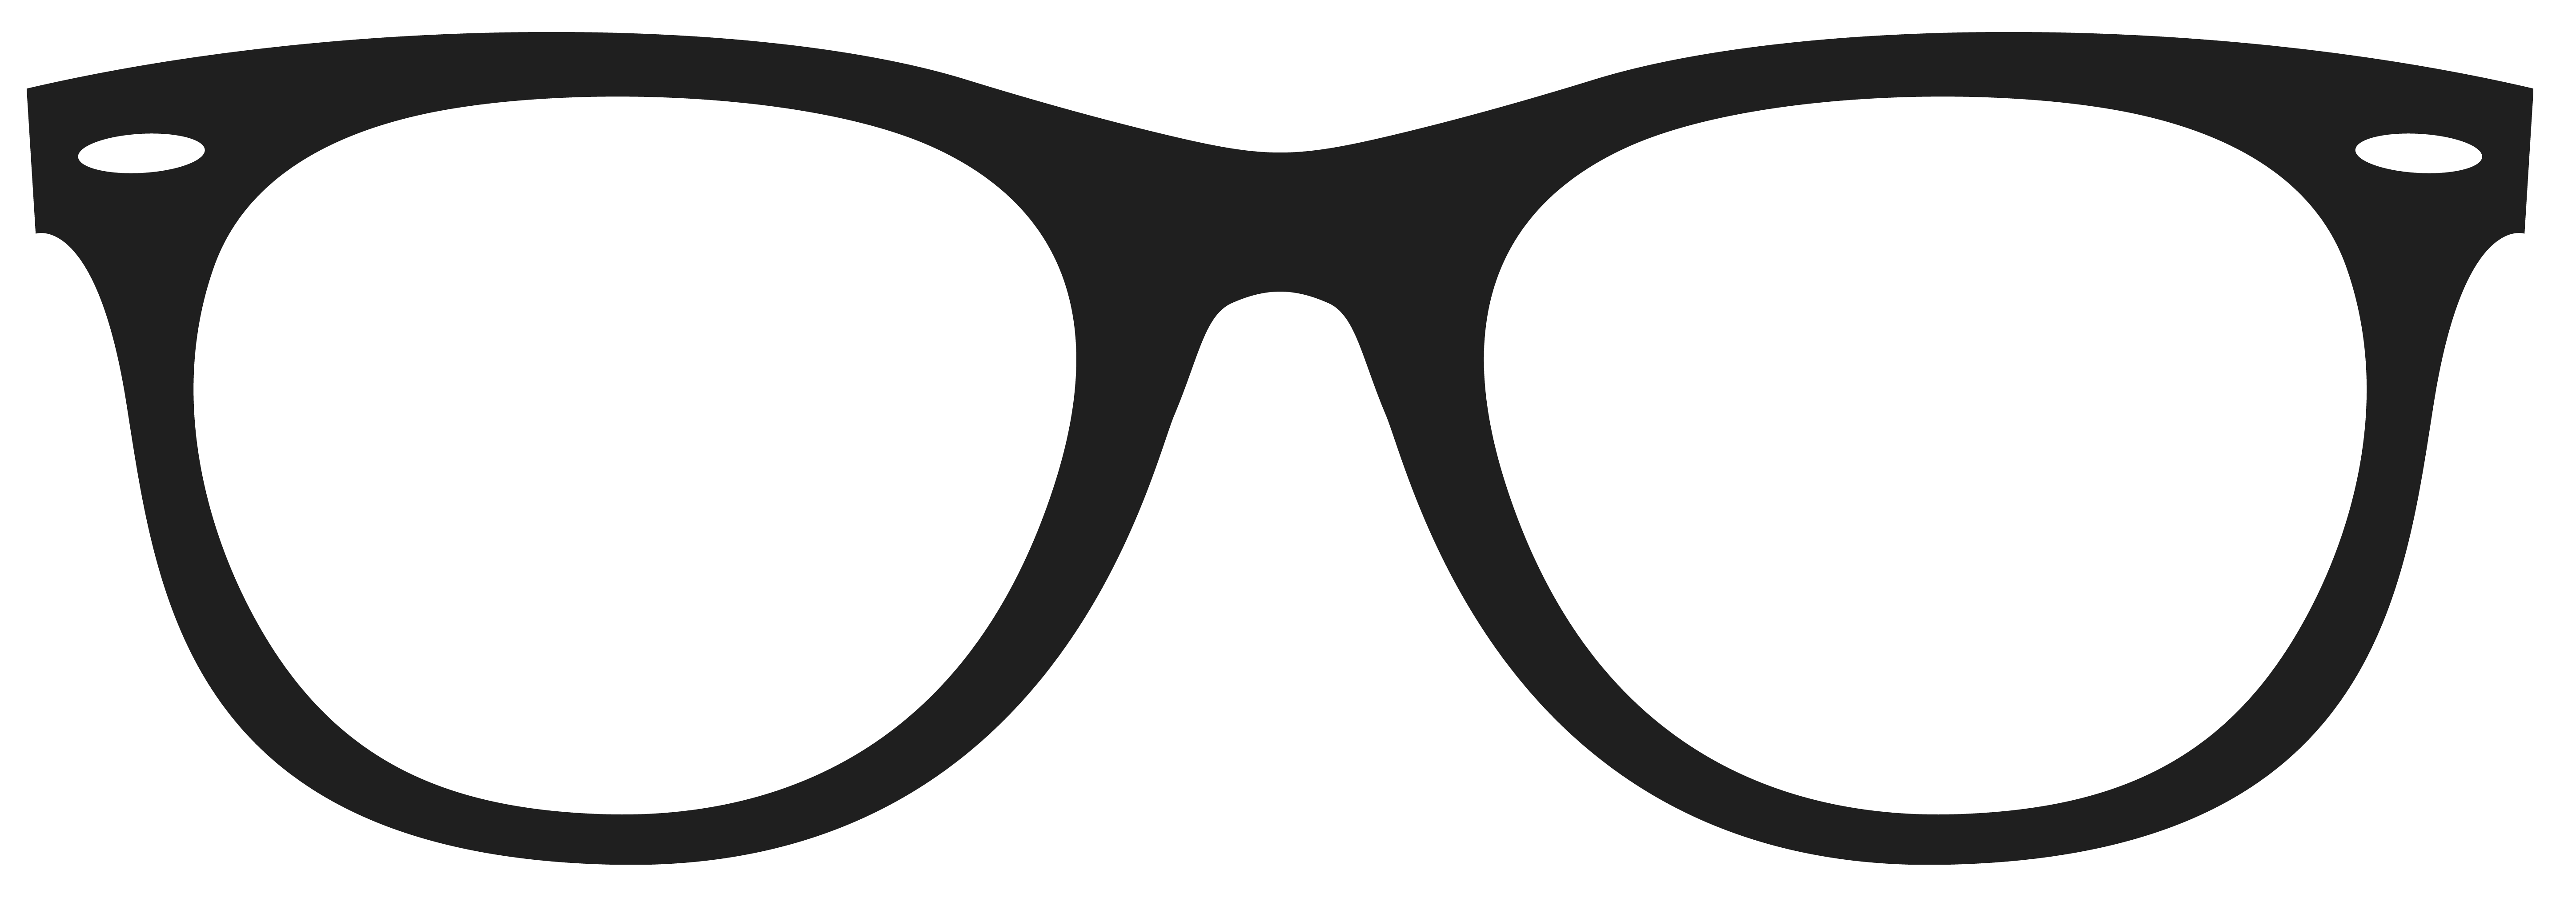 Glasses Download Free Image Clipart